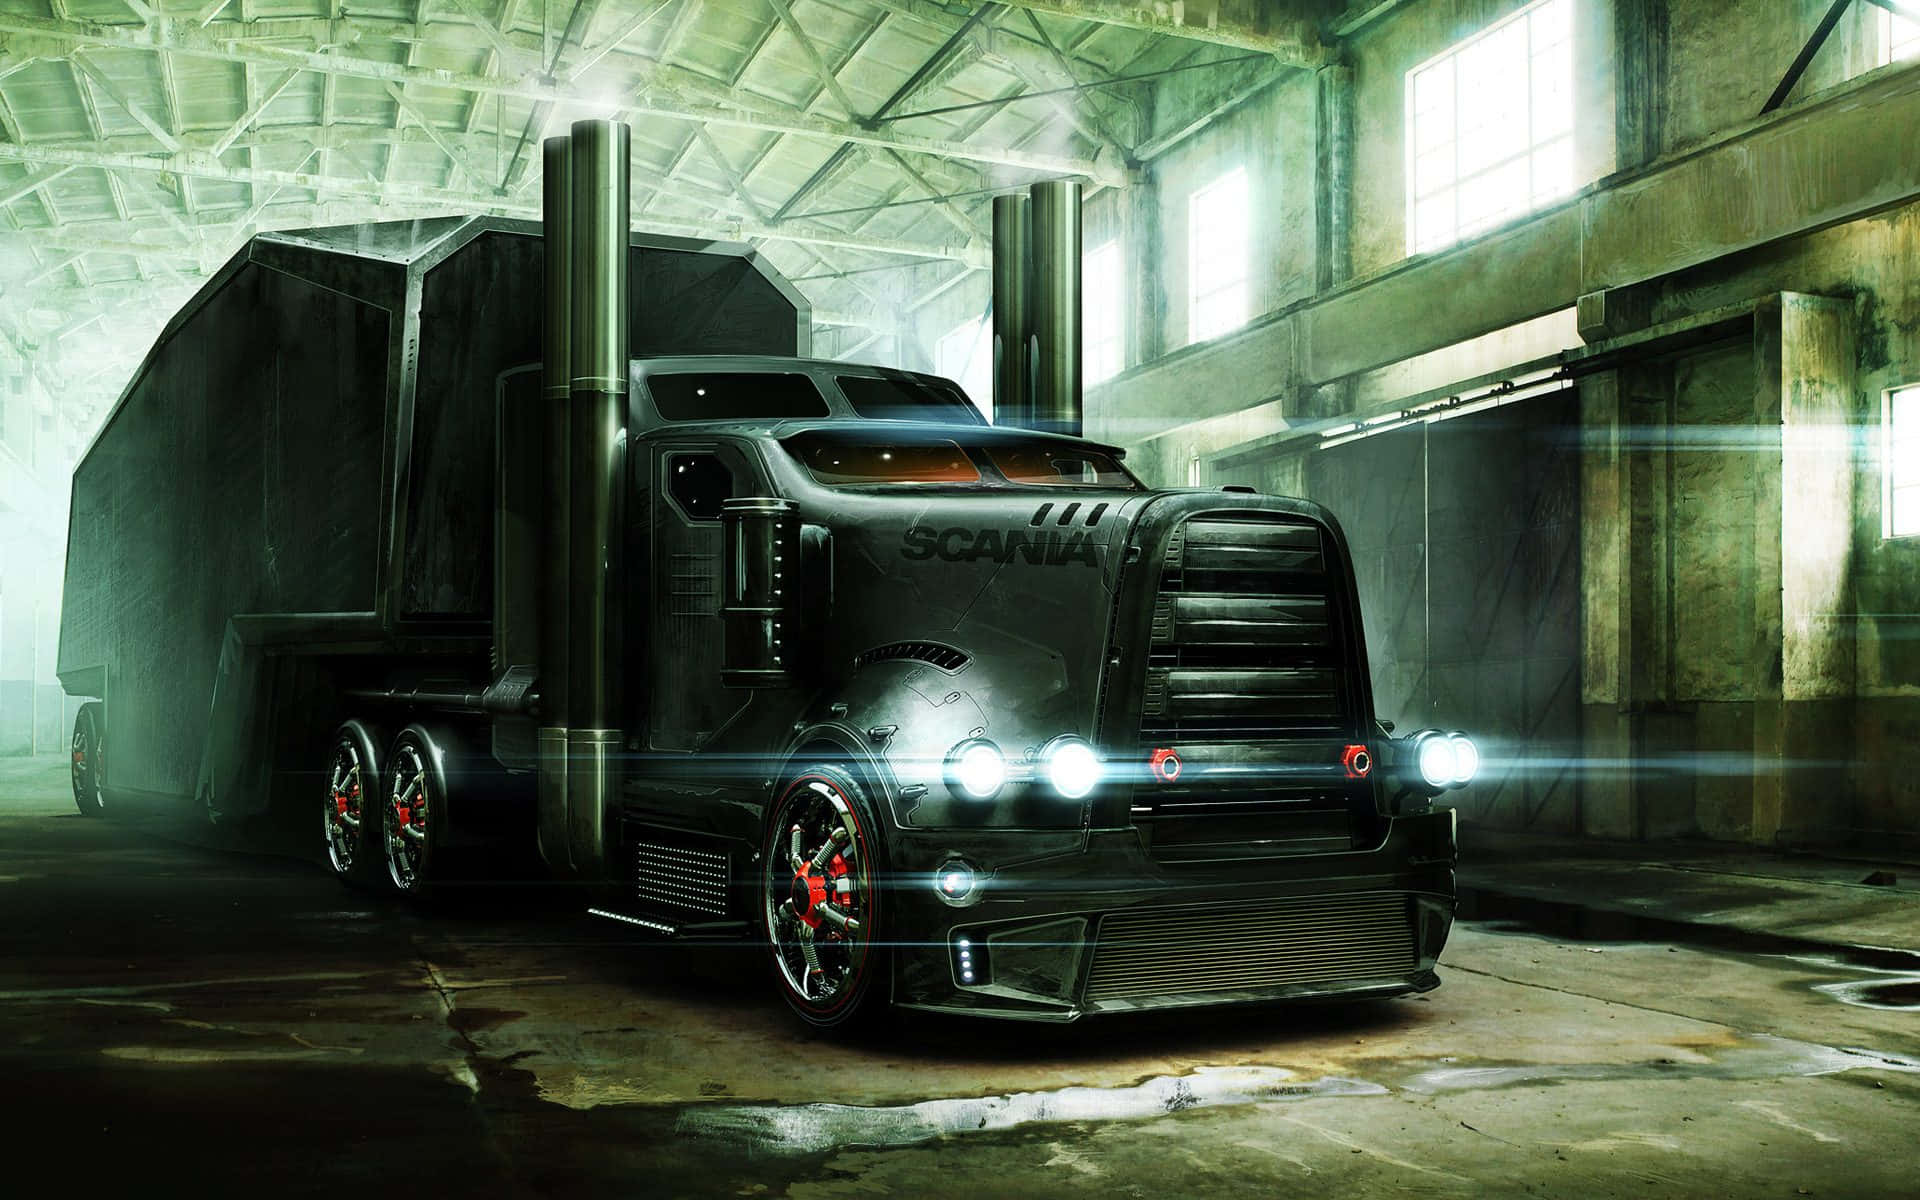 A Large Truck In A Dark Warehouse